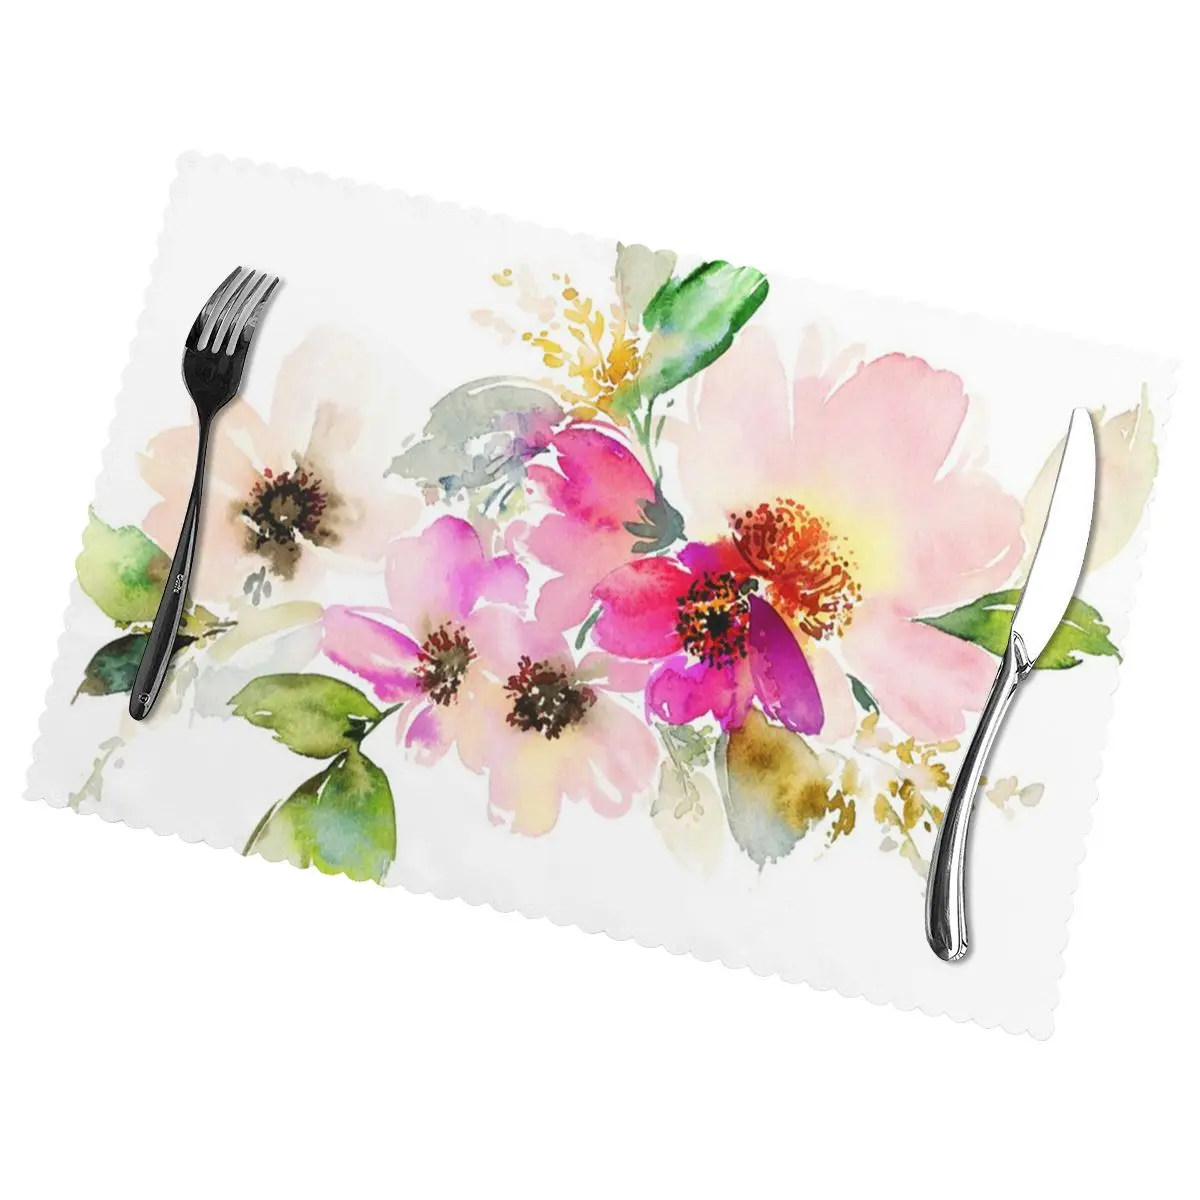 

Watercolor Flower Non-Slip Insulation Place Mats for Kitchen Dining Table Washable Placemats Bowl Coaster Cup Mat Set of 6